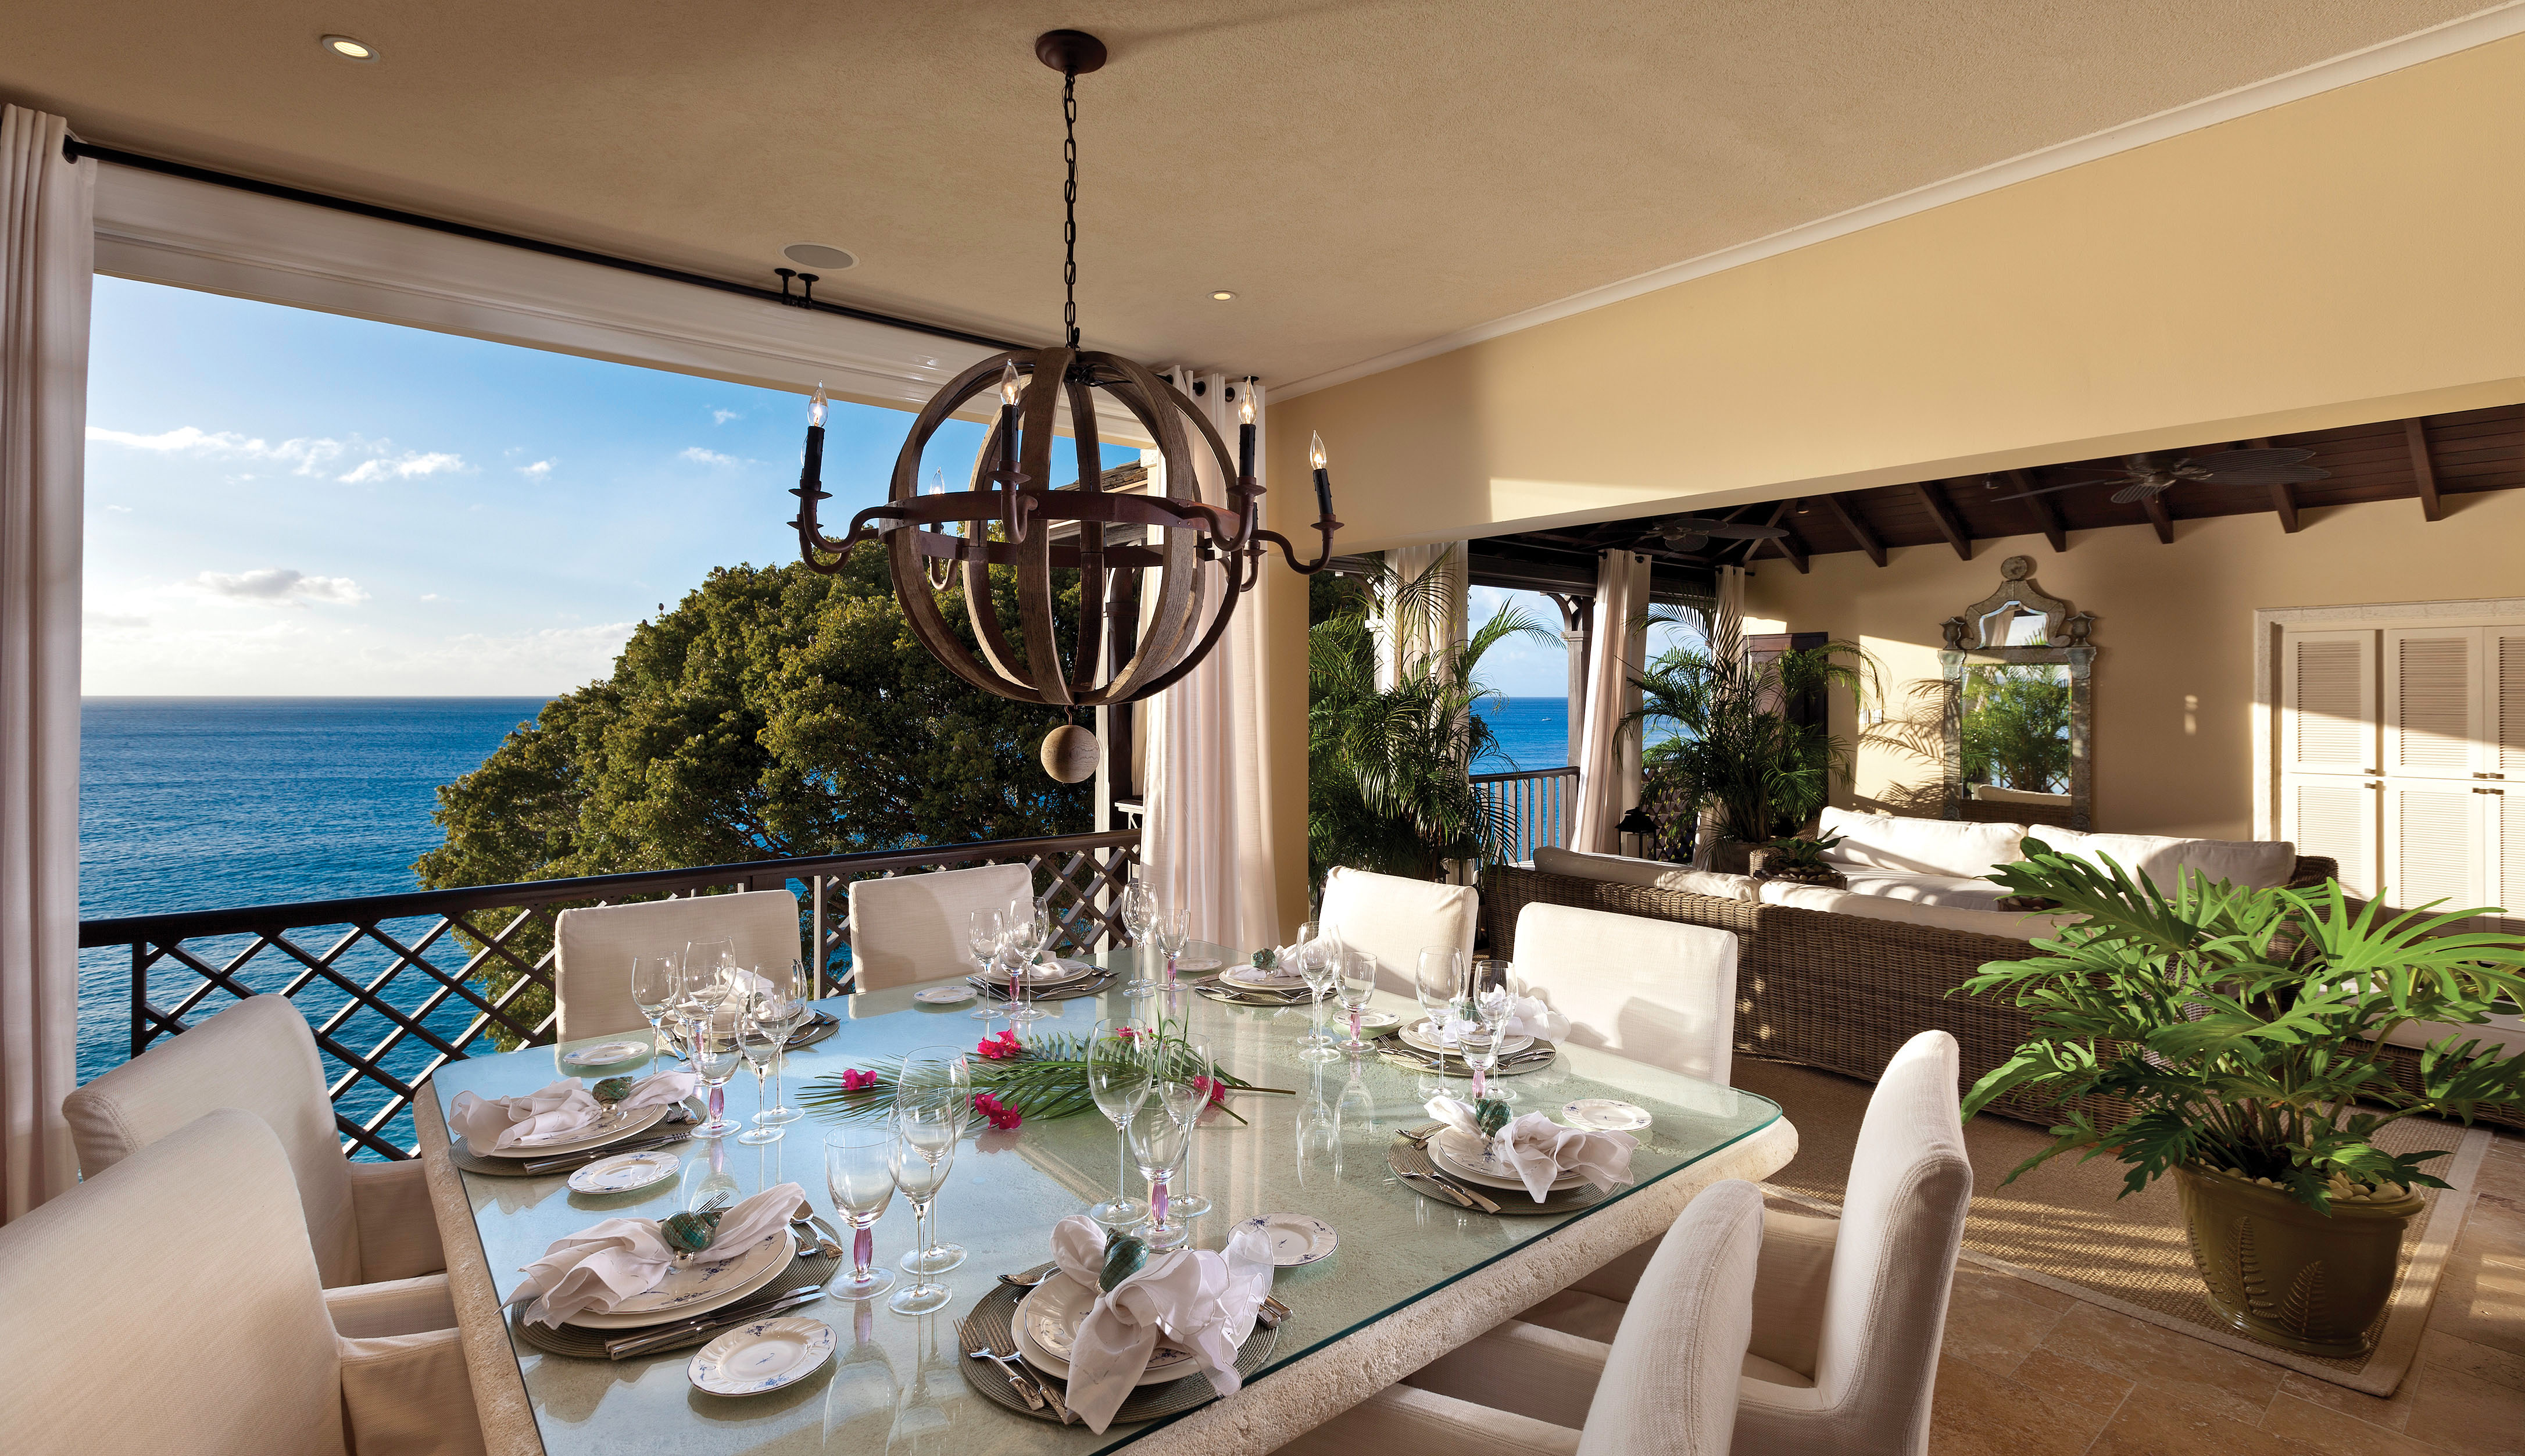 Guests are treated to sea-blue Barbados panoramas as they dine al fresco enjoying meals prepared by their private chef.